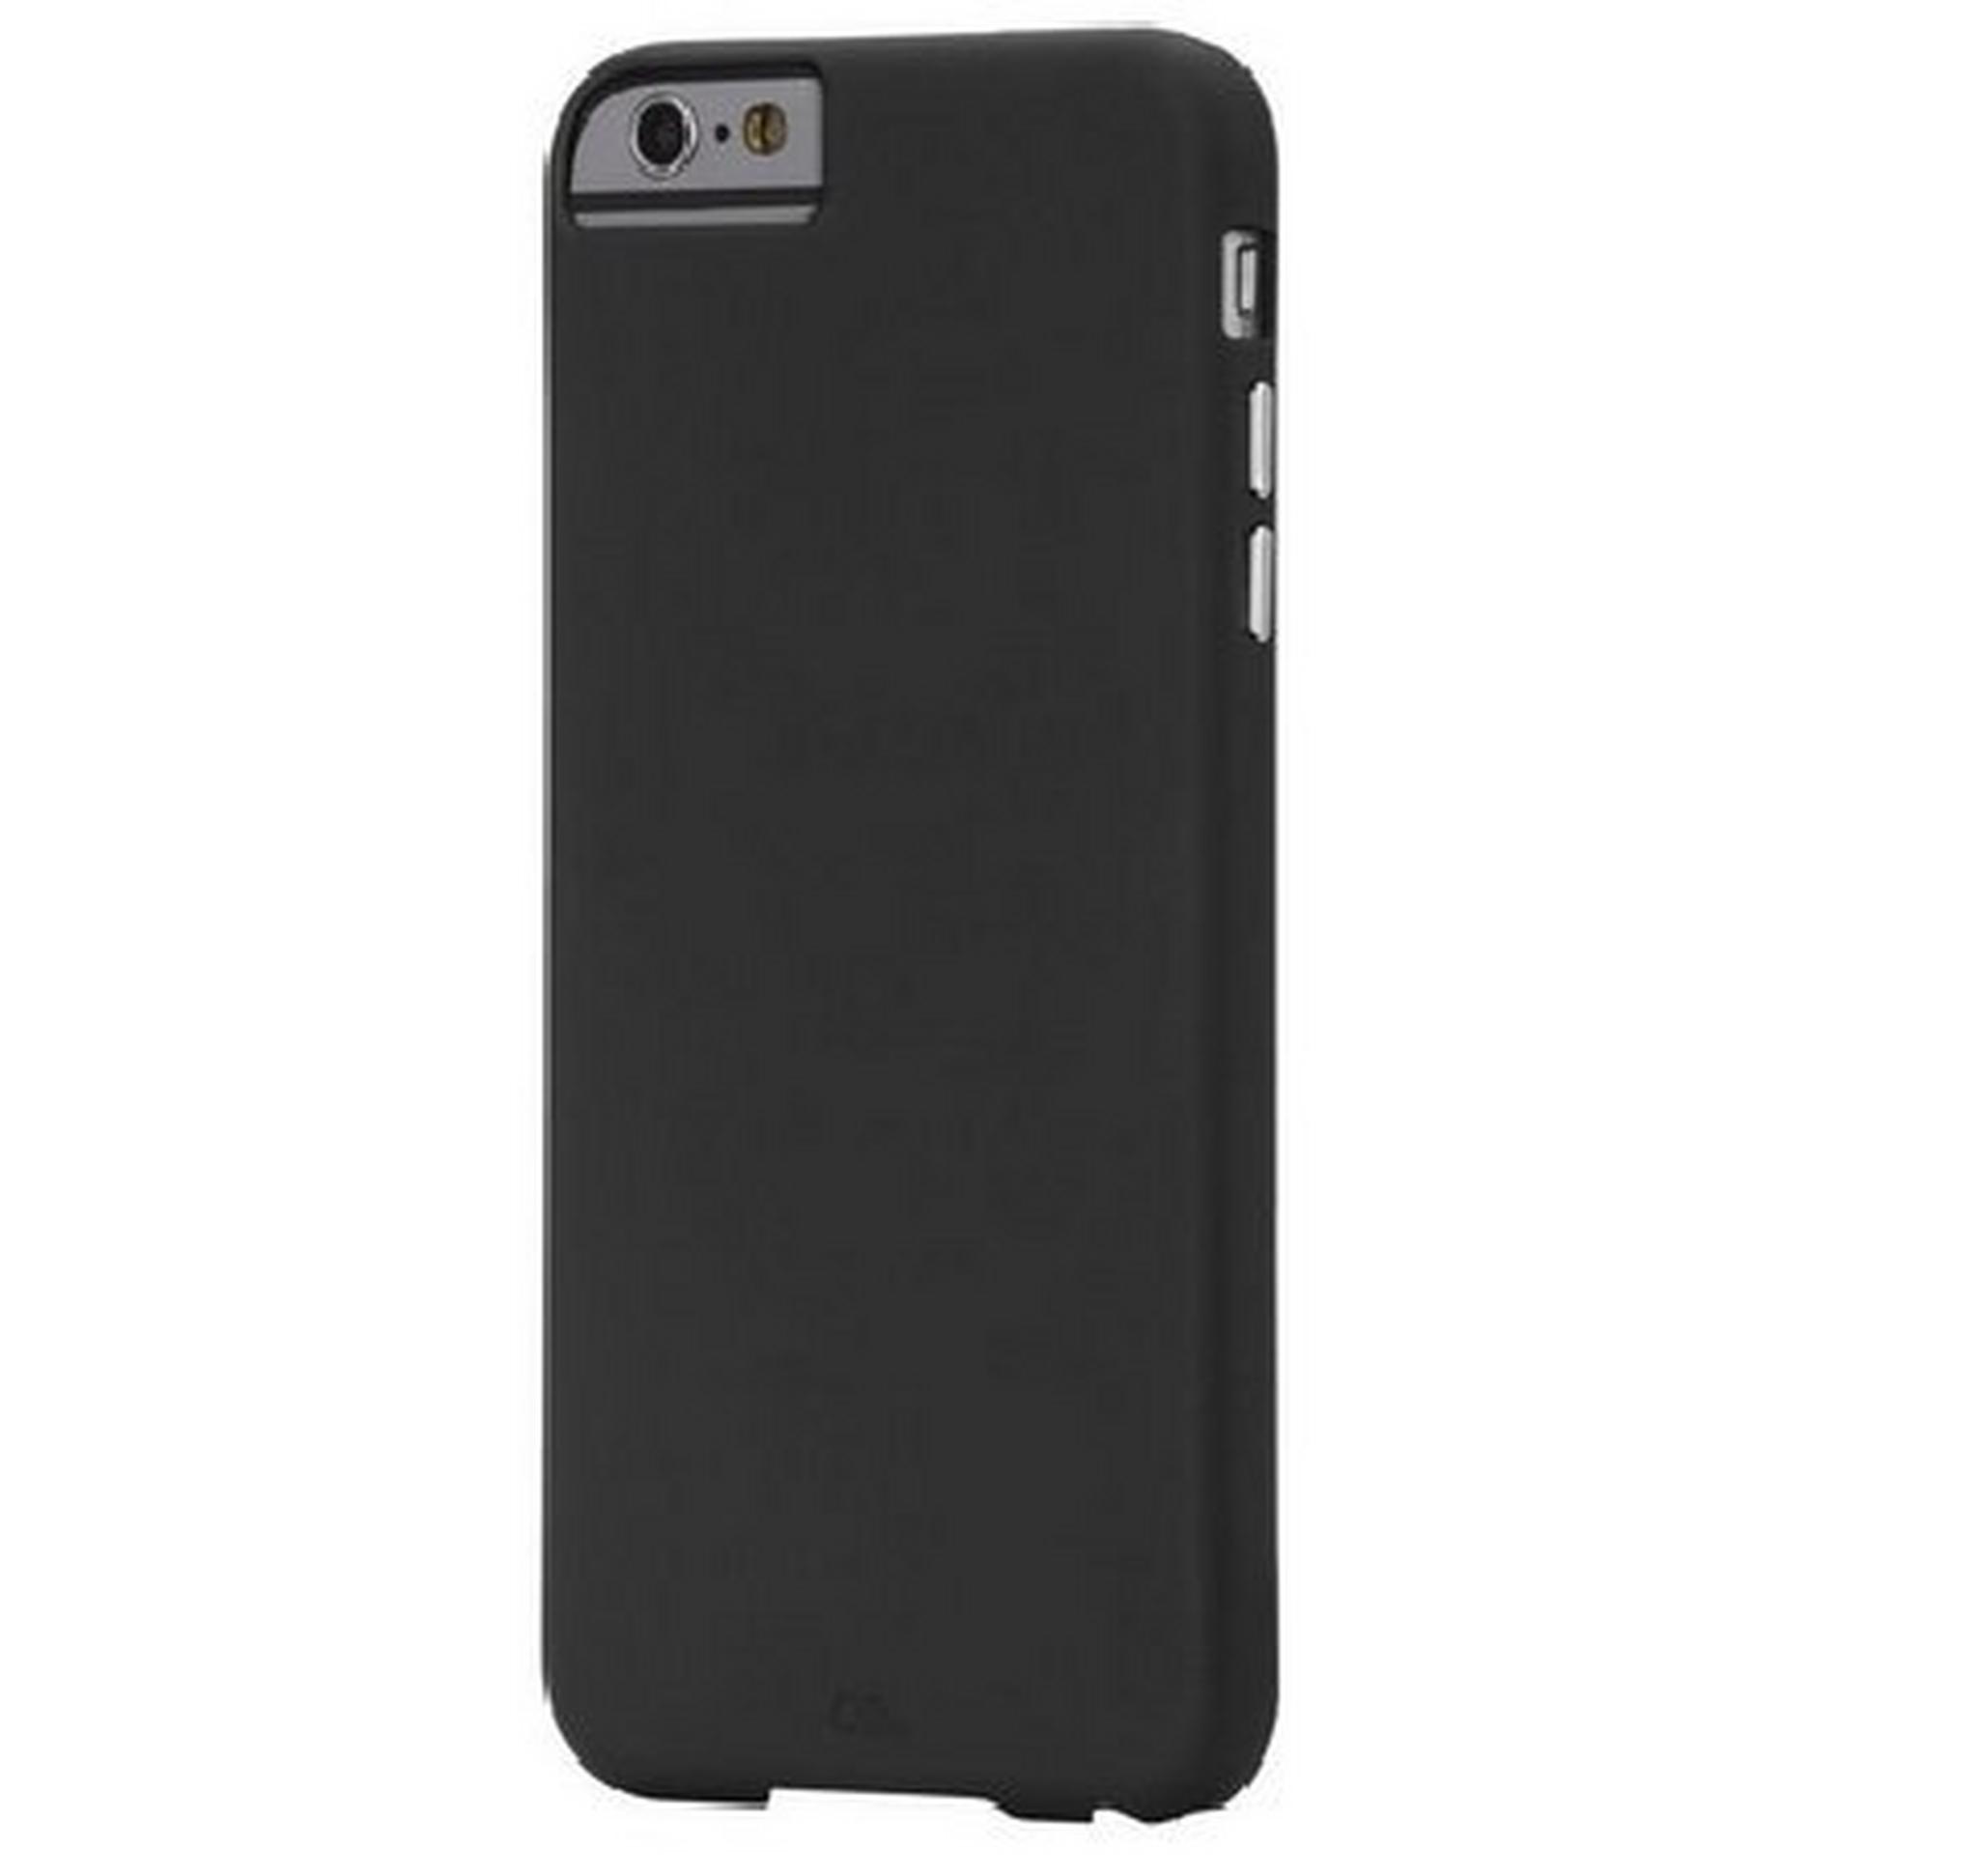 Case Mate Barely There for iPhone 6 Plus with Metal Buttons - Black